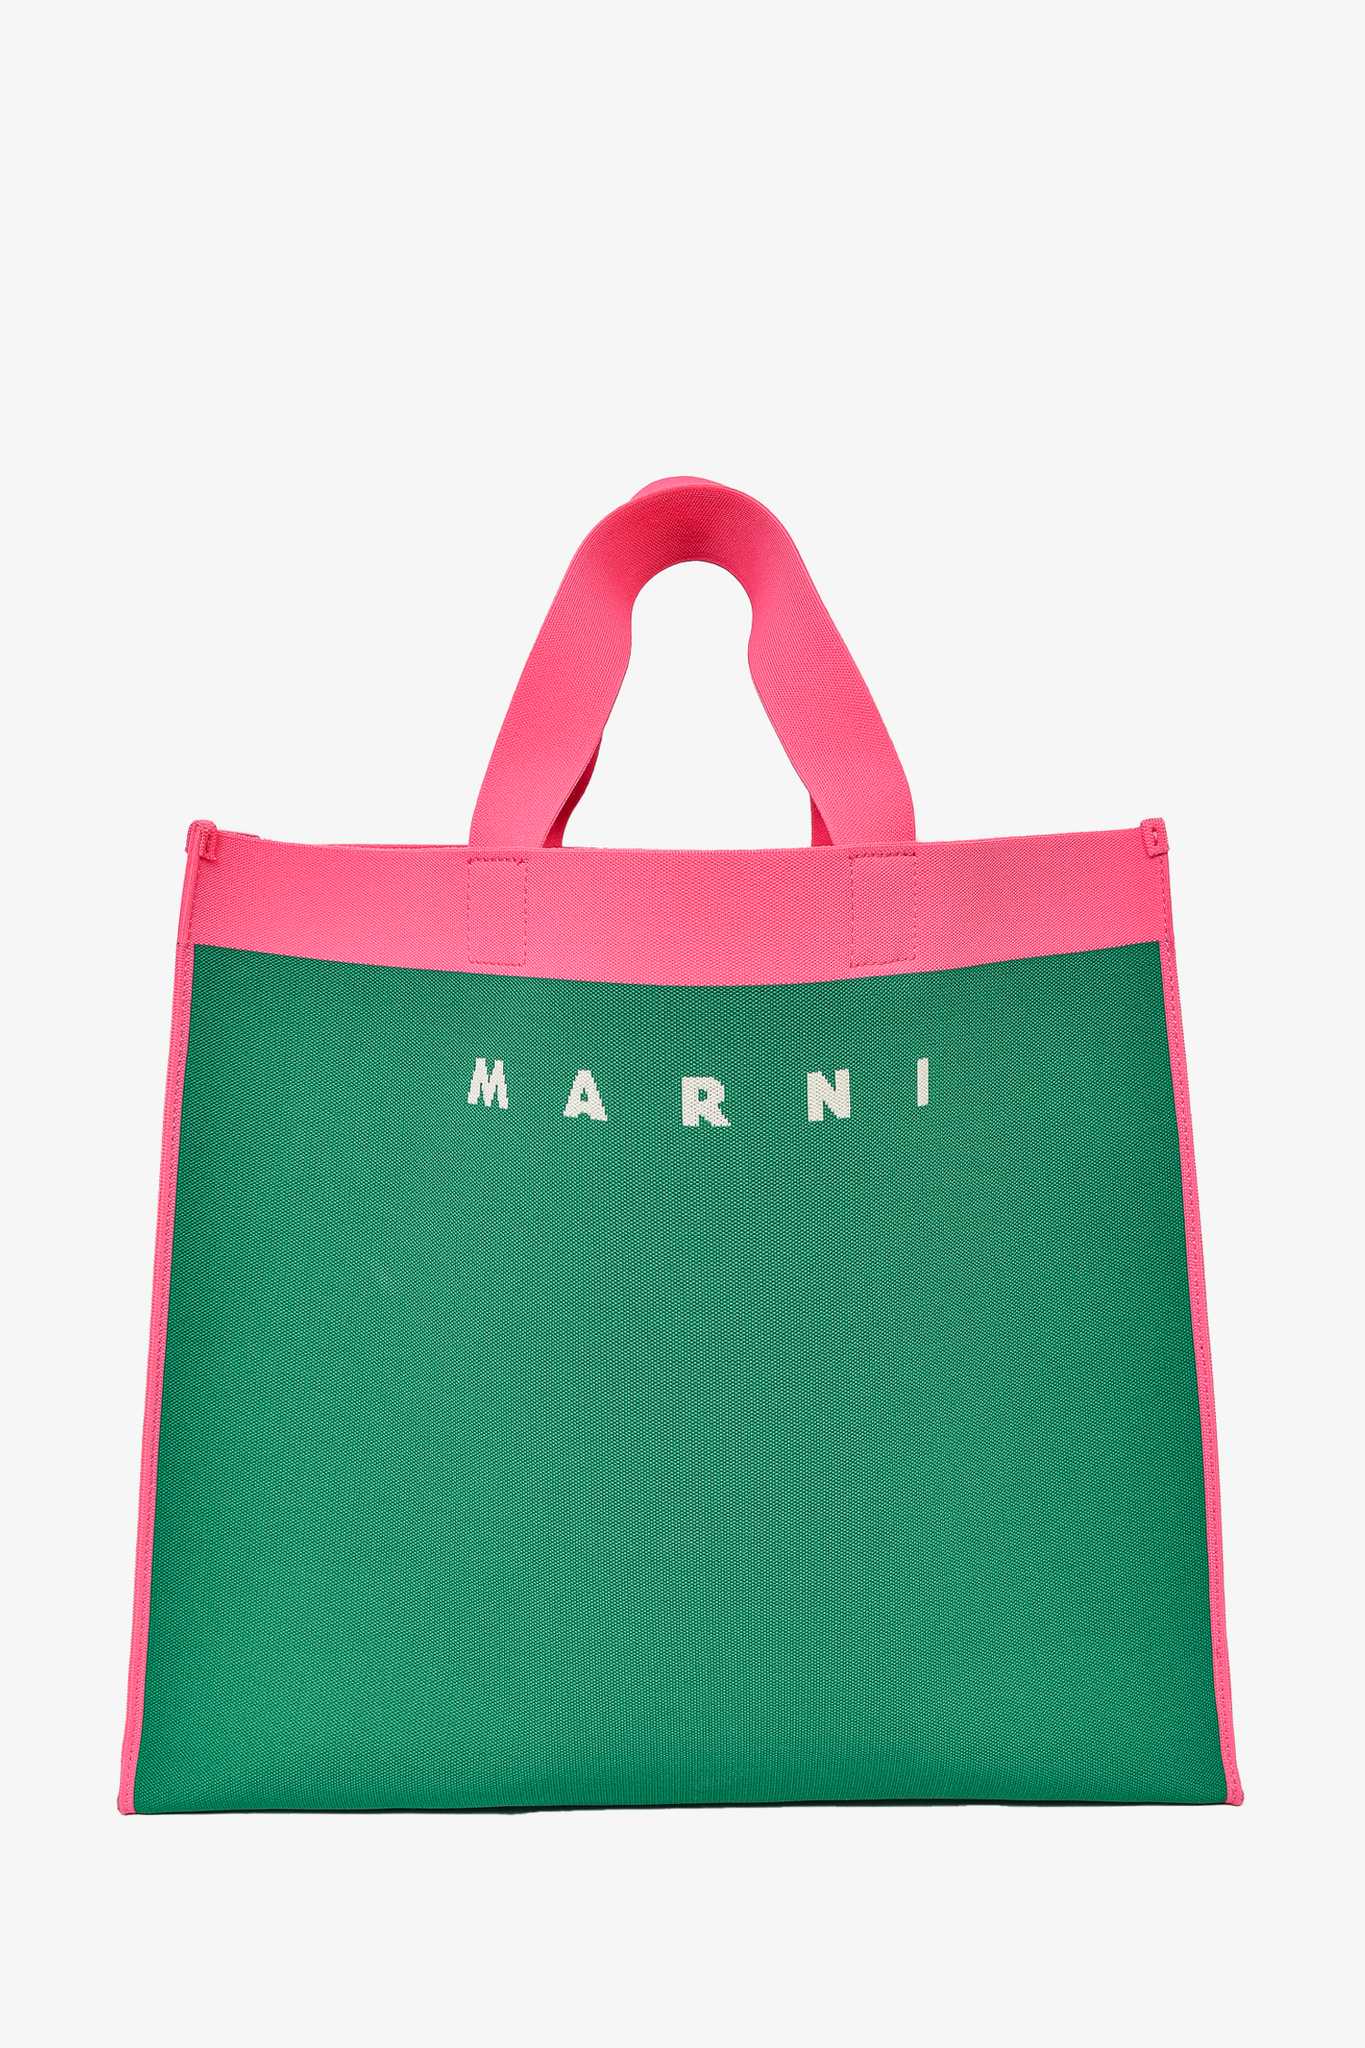 Marni Green/Pink Canvas Large Tote w/ Leather Pouch w/ Tags